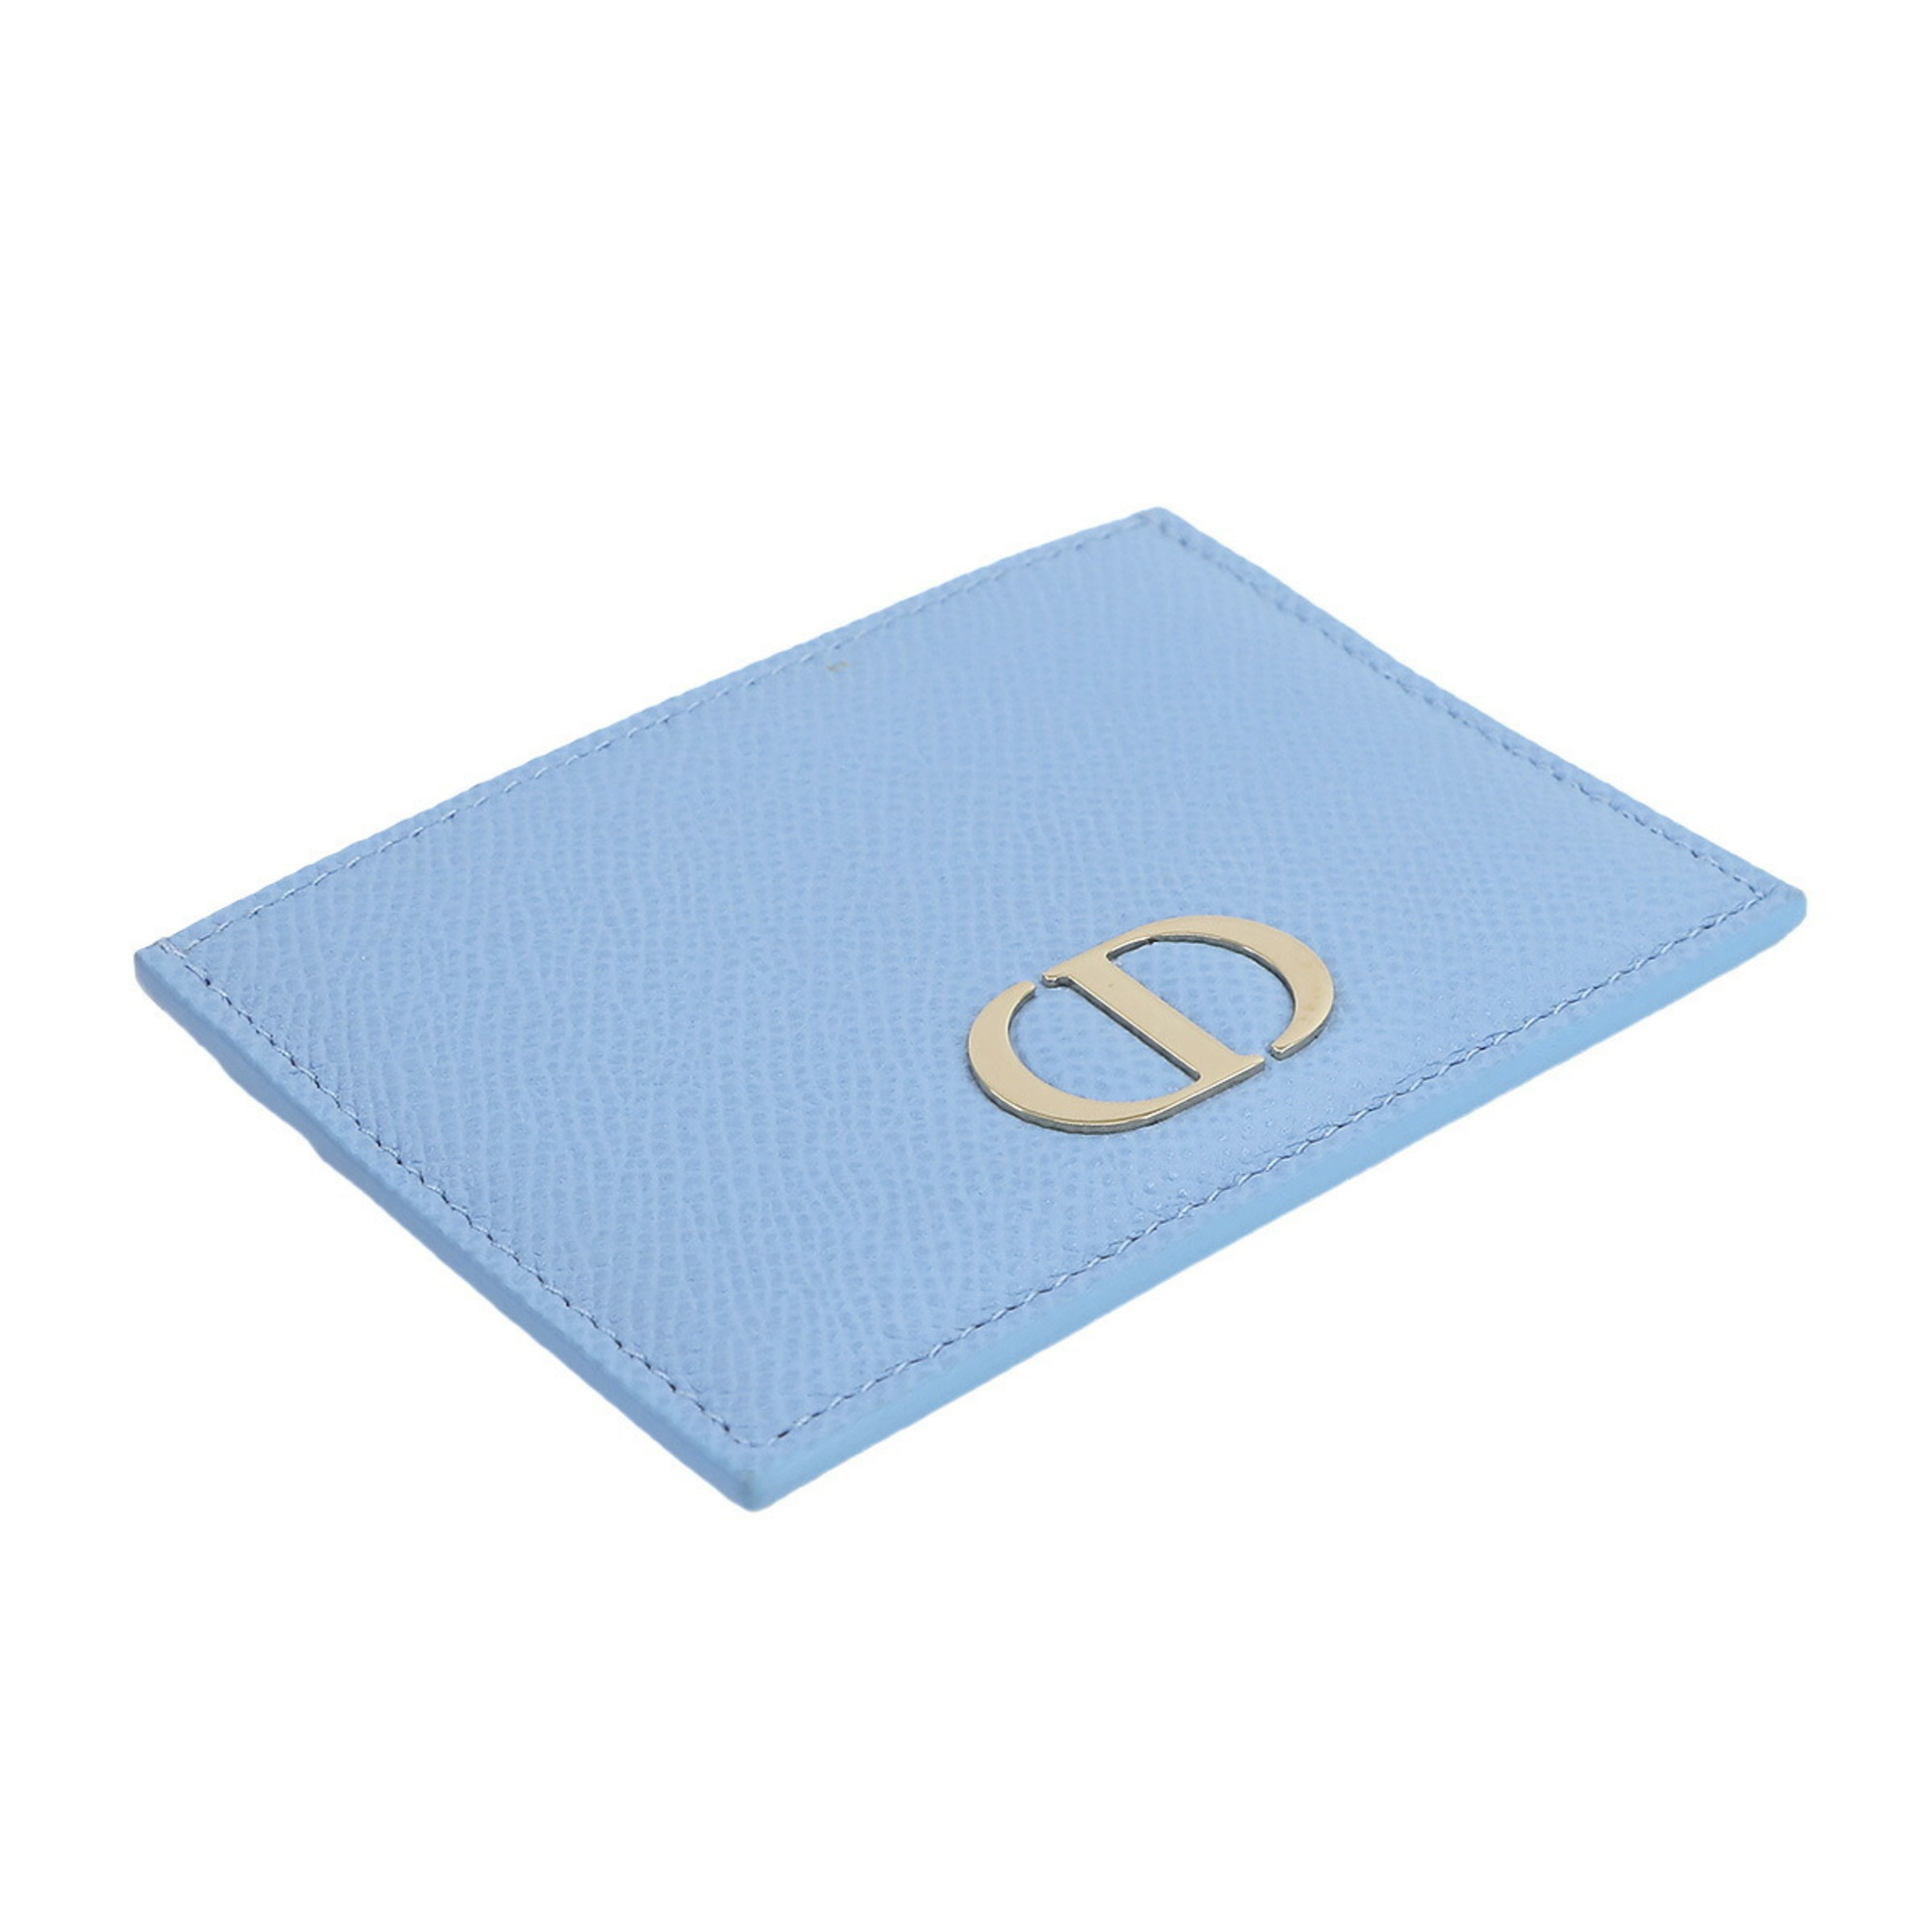 Christian Dior 30 Montaigne Business Card Holder/Card Case Leather Blue S2098OBAE